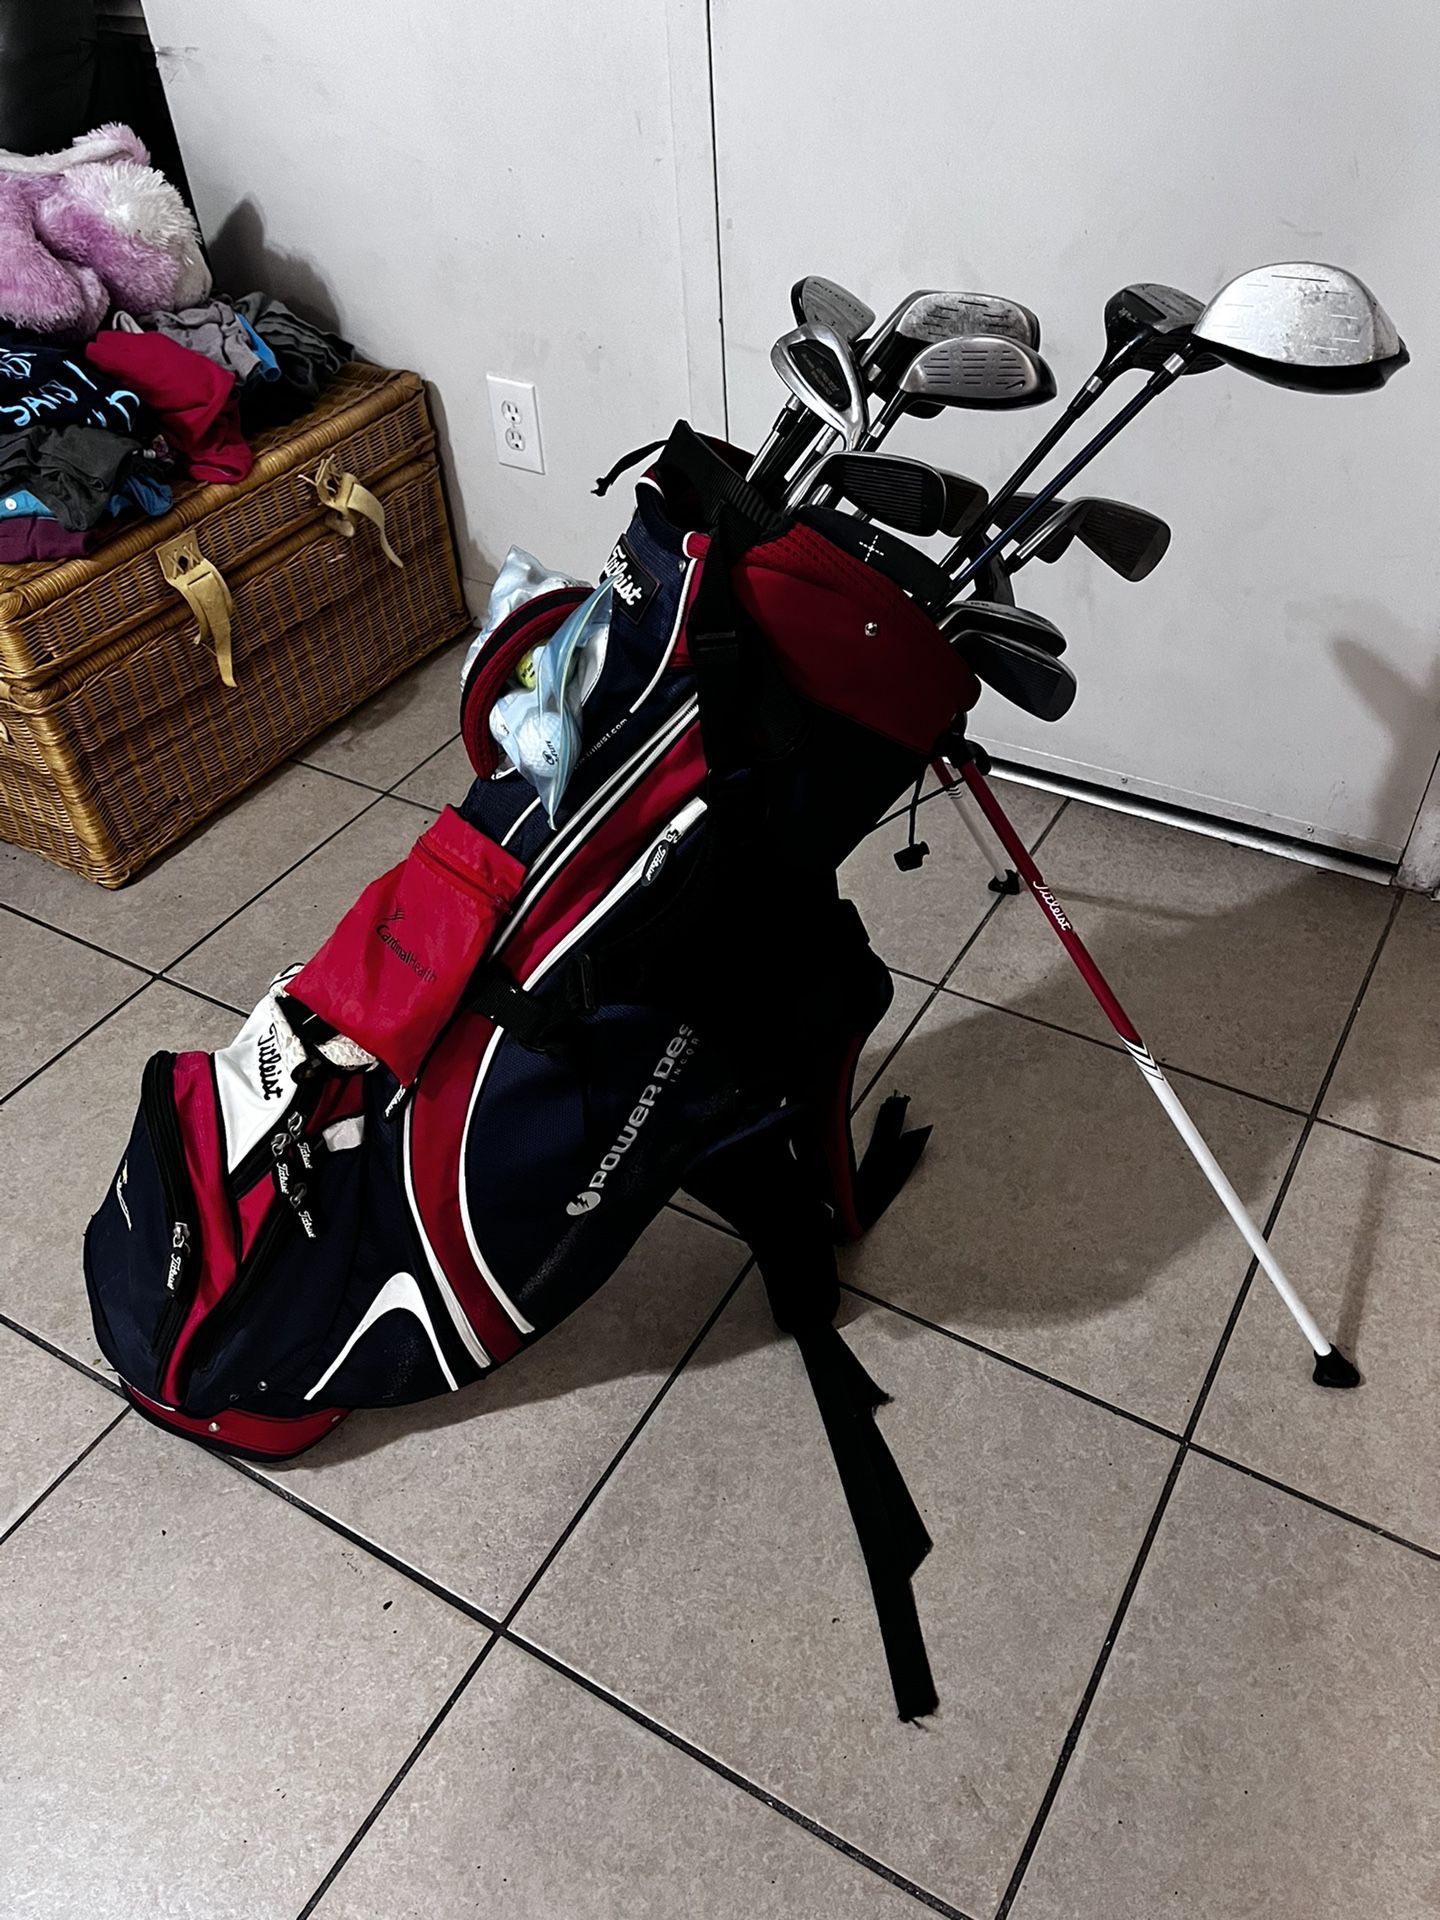  Titleist Full Golf Club Set Got All Gadgets  Some Potter Are More Expensive It Was My Grand Fath ers I’m Just Trying To Get Like 200Price Is Negotiab